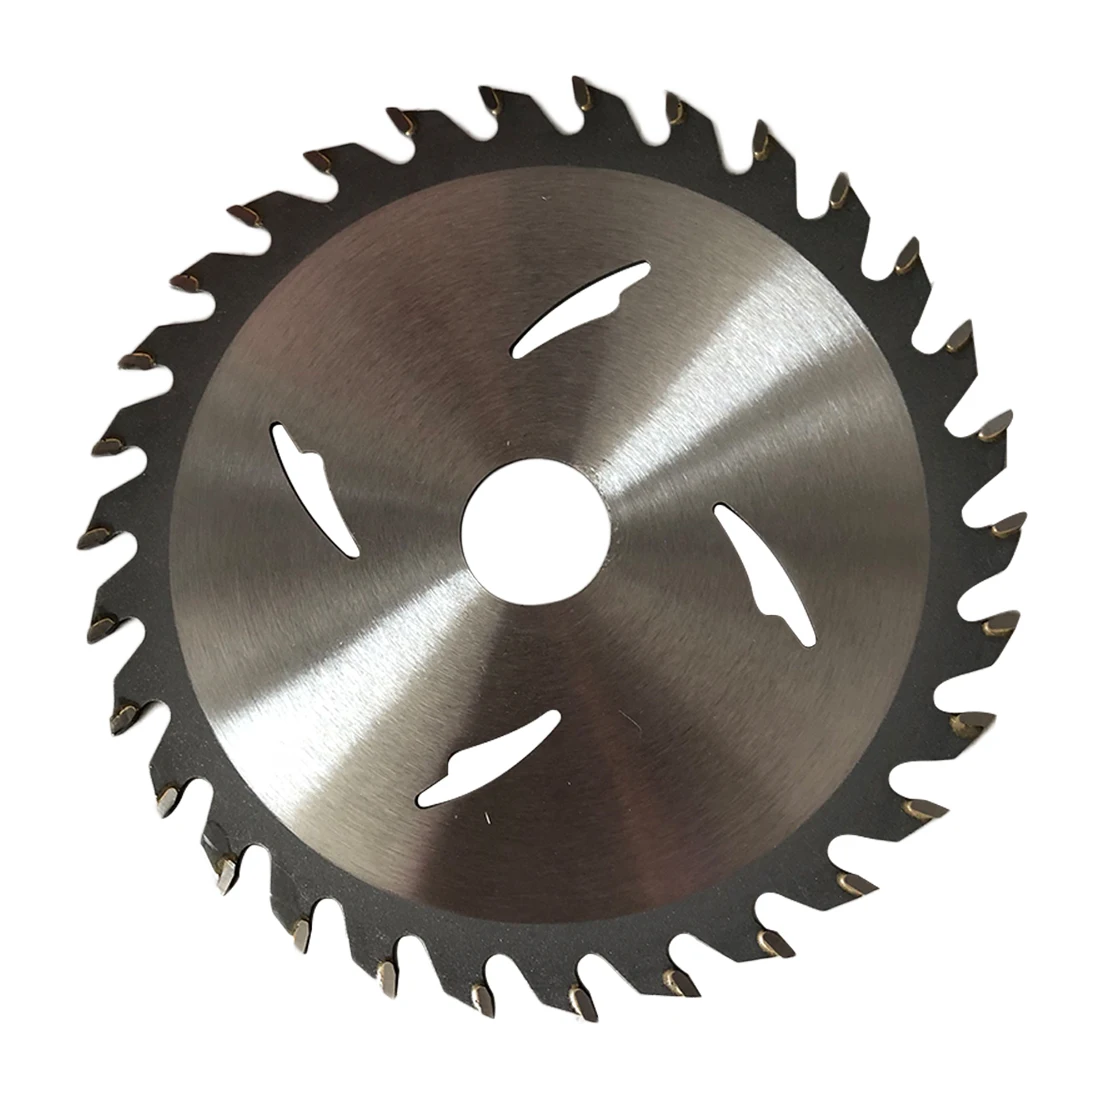 

Hot Sharp and durable Wood Cutting Disc 1PC 125*20/20*30T/40T TCT Saw Blade Carbide Tipped Saw blade cutting piece Circular saw